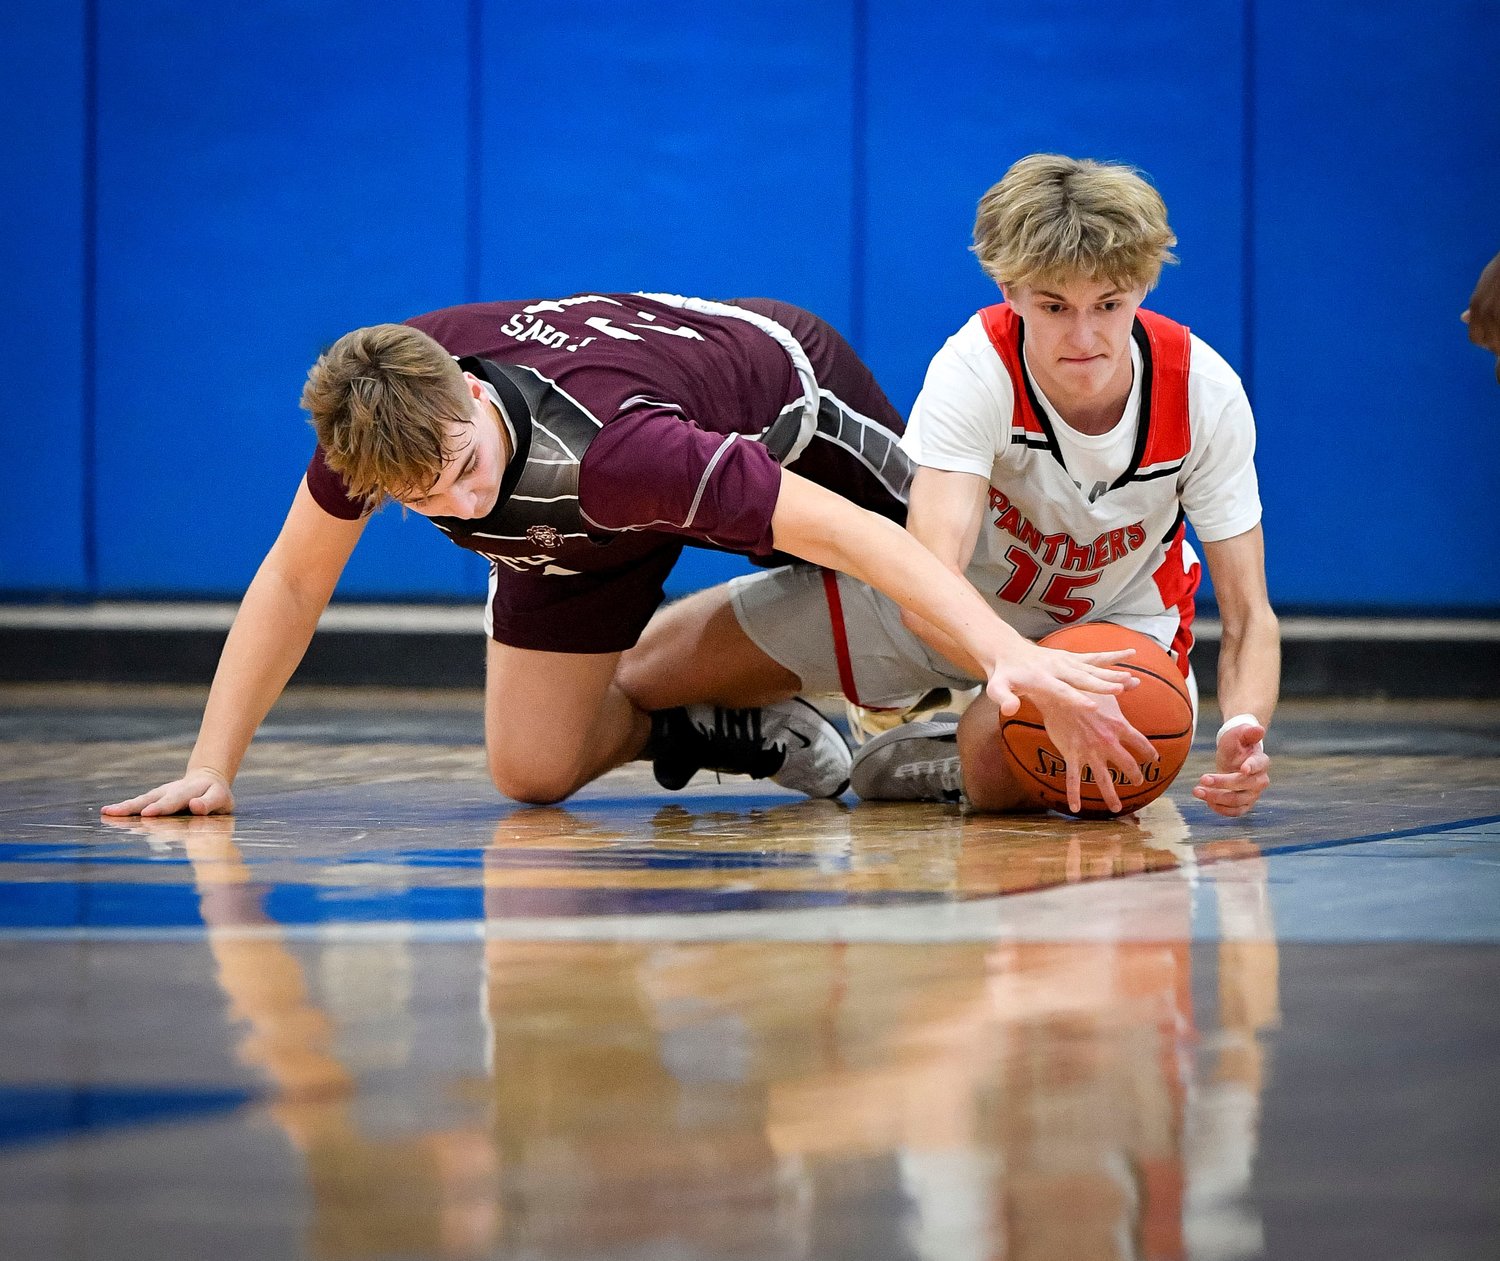 Plumstead’s Zach Knudsen gathers a loose ball in front of a diving Bryce Robison.